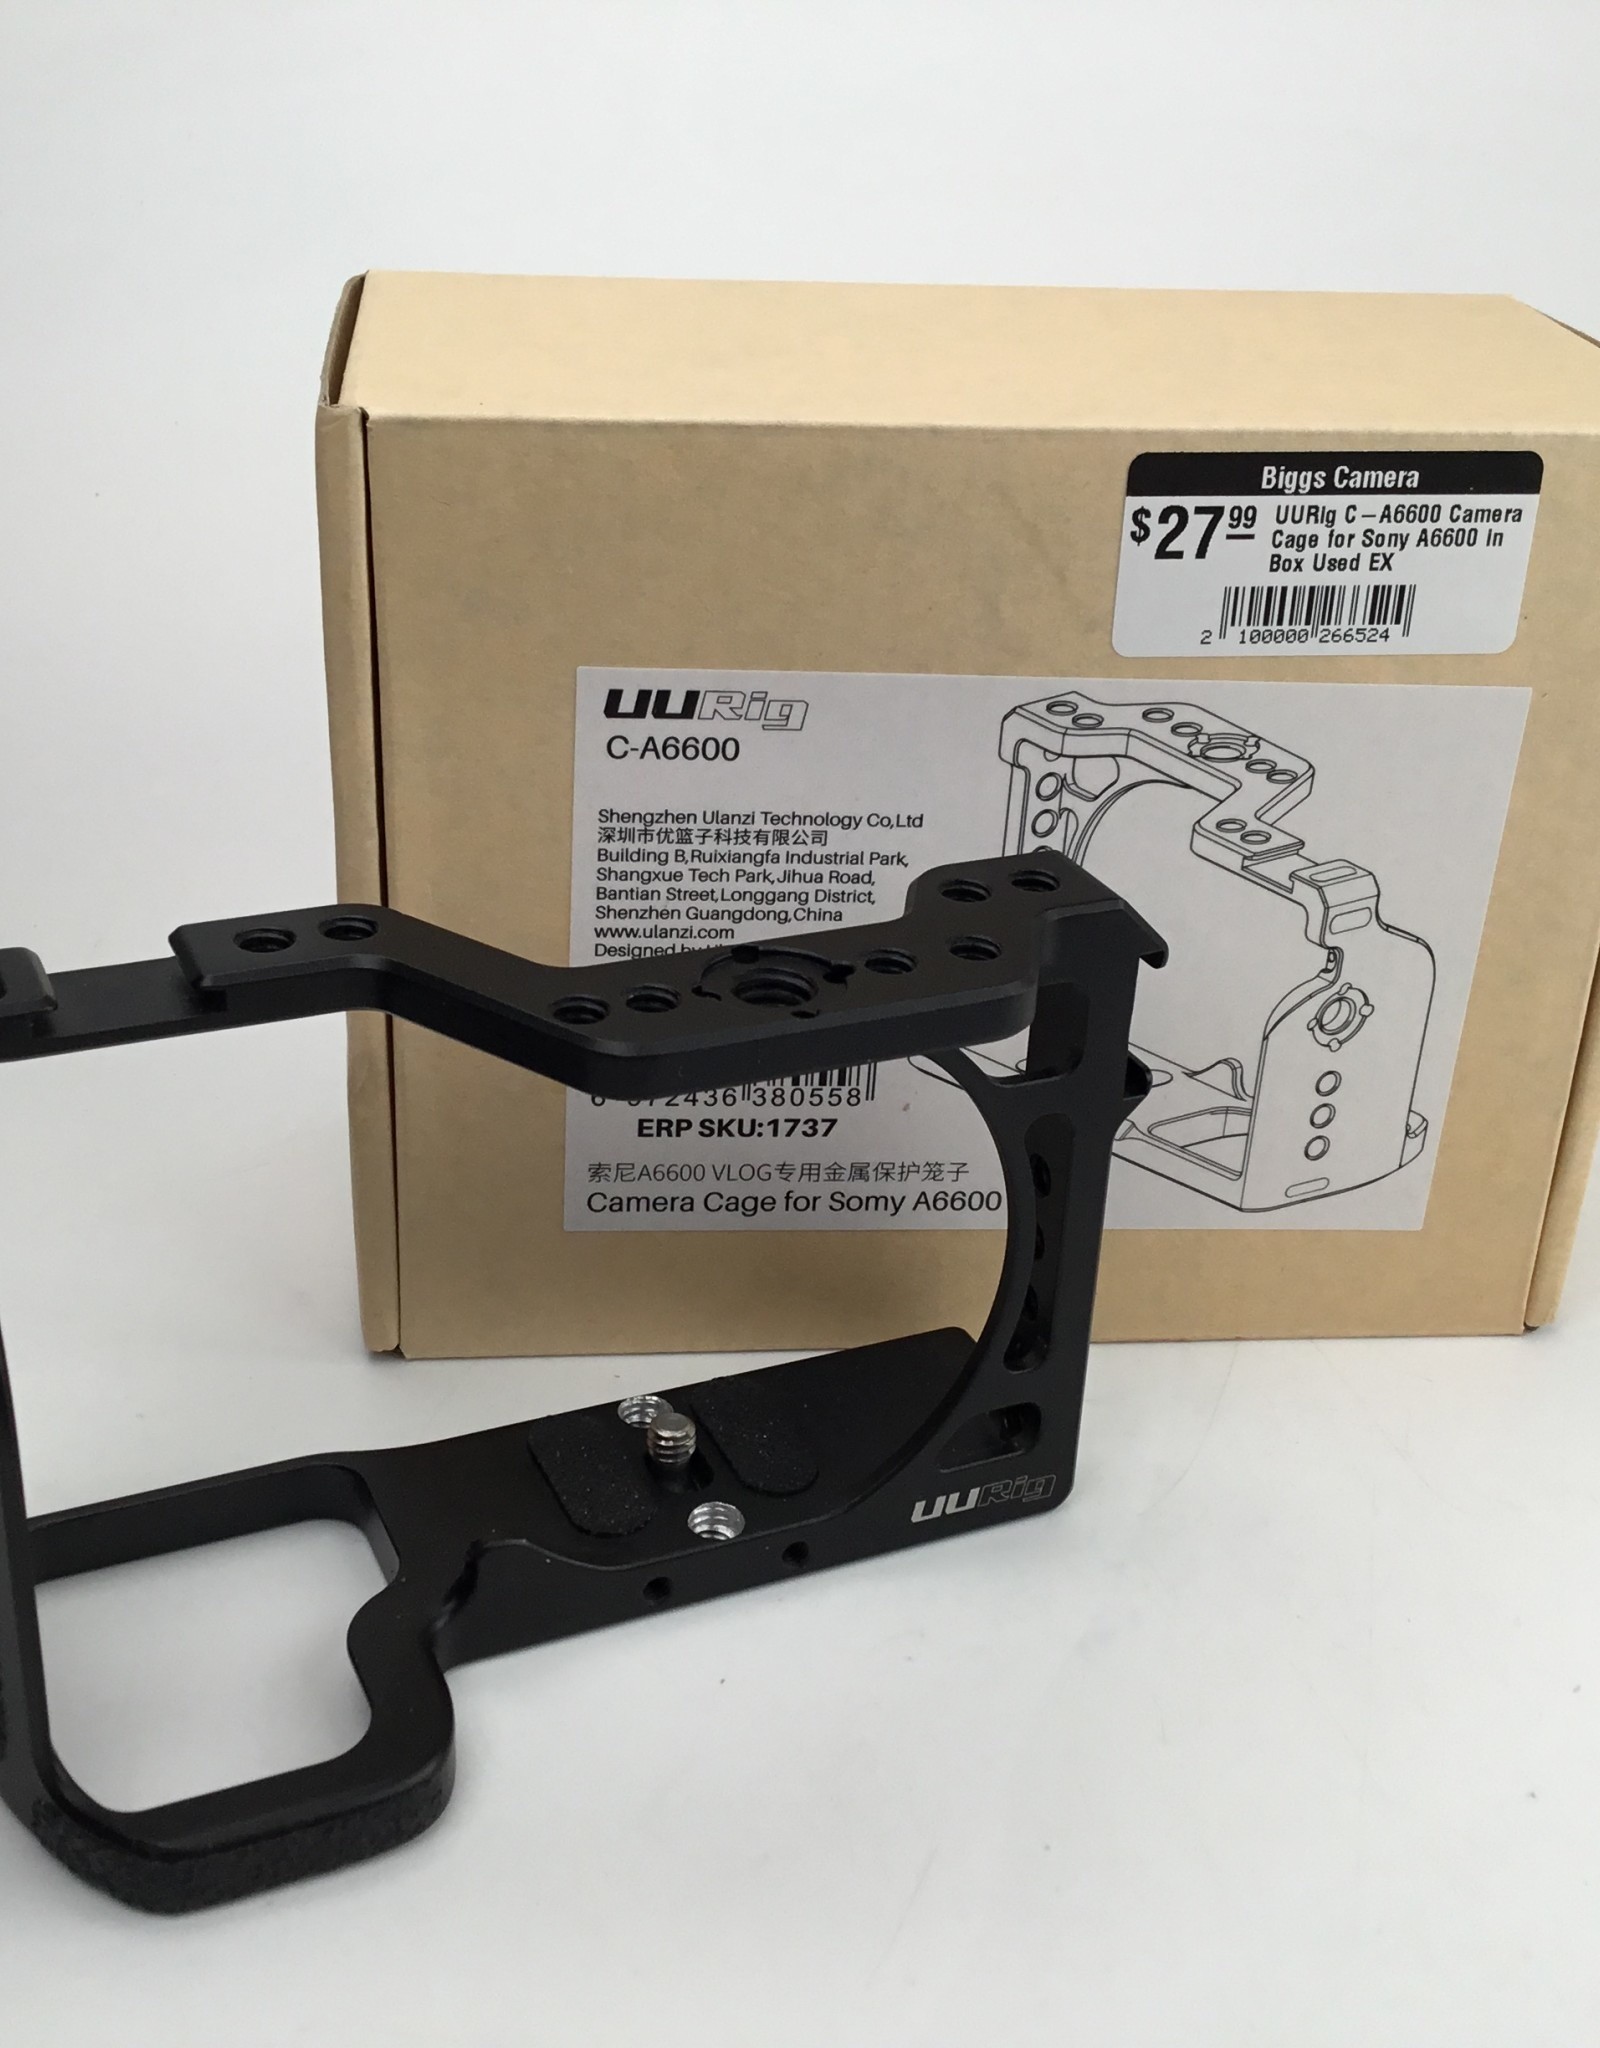 UURig C-A6600 Camera Cage for Sony A6600 in Box Used EX